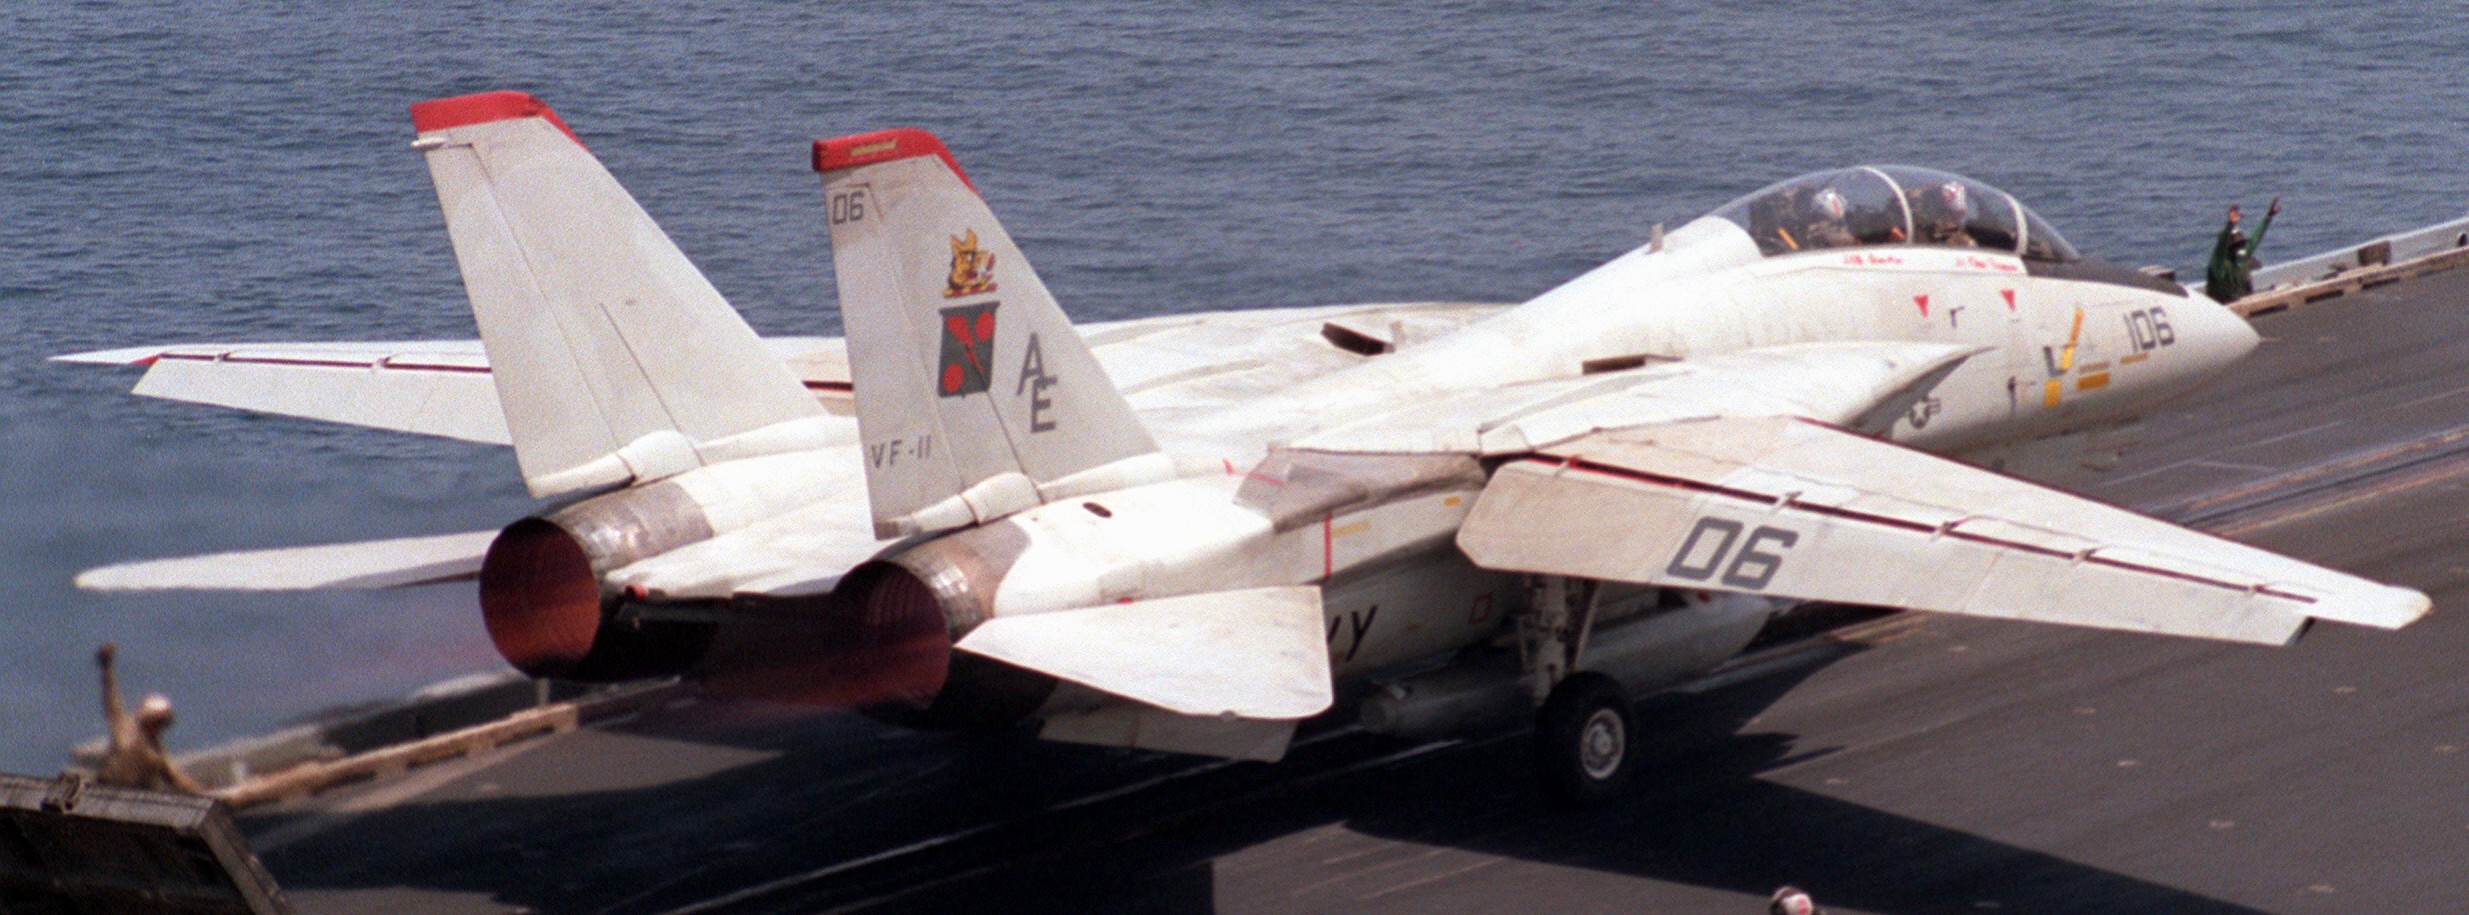 vf-11 red rippers fighter squadron us navy fitron f-14a tomcat carrier air wing cvw-6 uss forrestal cv-59 04